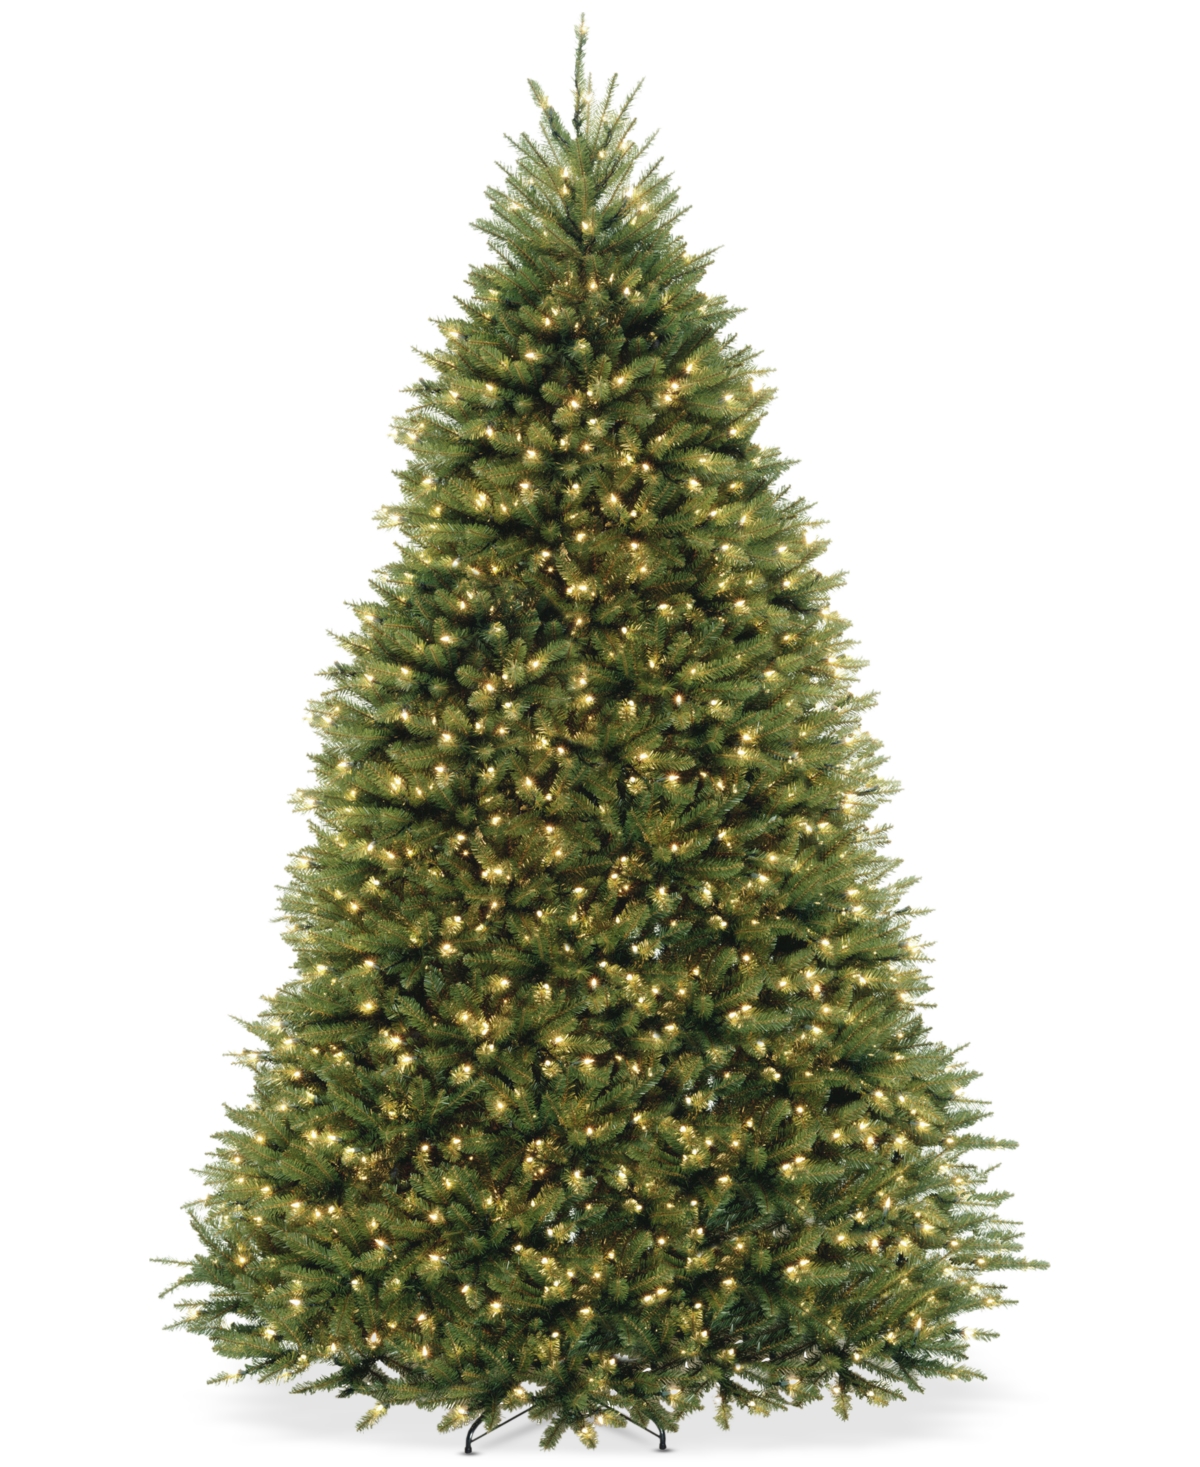 9' Dunhill Fir Full-Bodied & Hinged Tree With 900 Clear Lights - Green